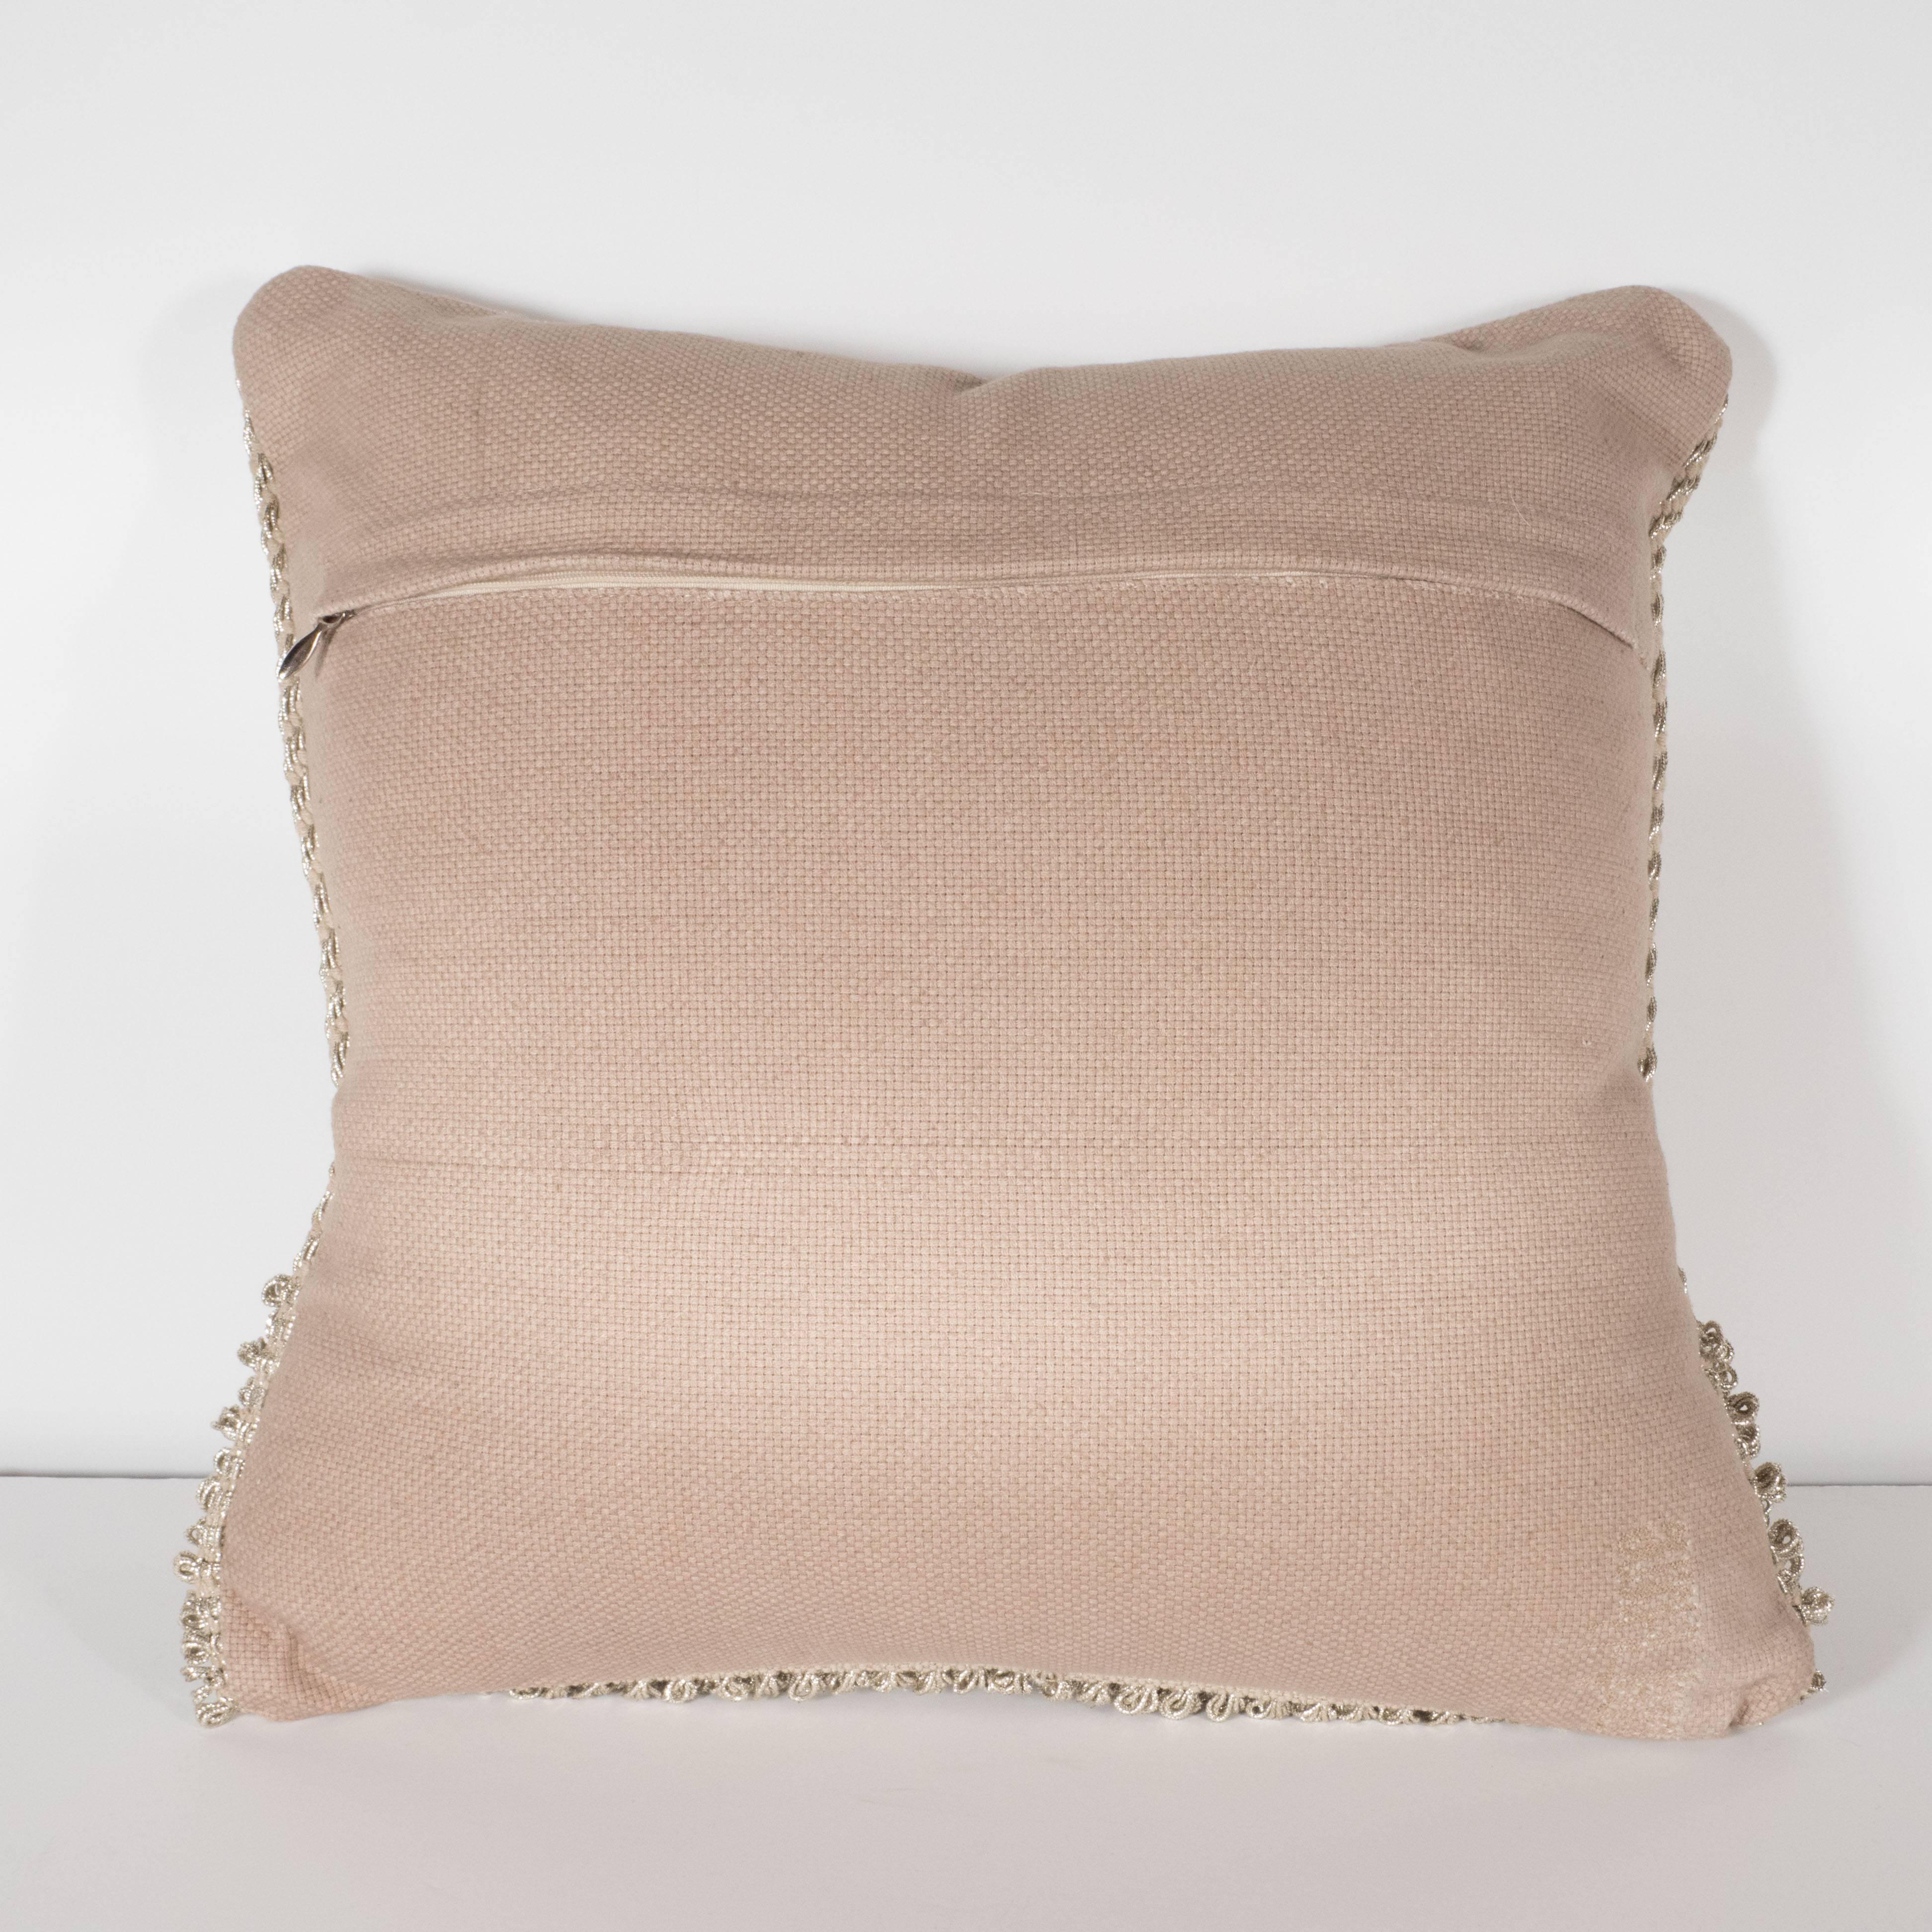 Pair of Textural Modernist Pillows in Taupe with Metallic Silver Thread For Sale 1